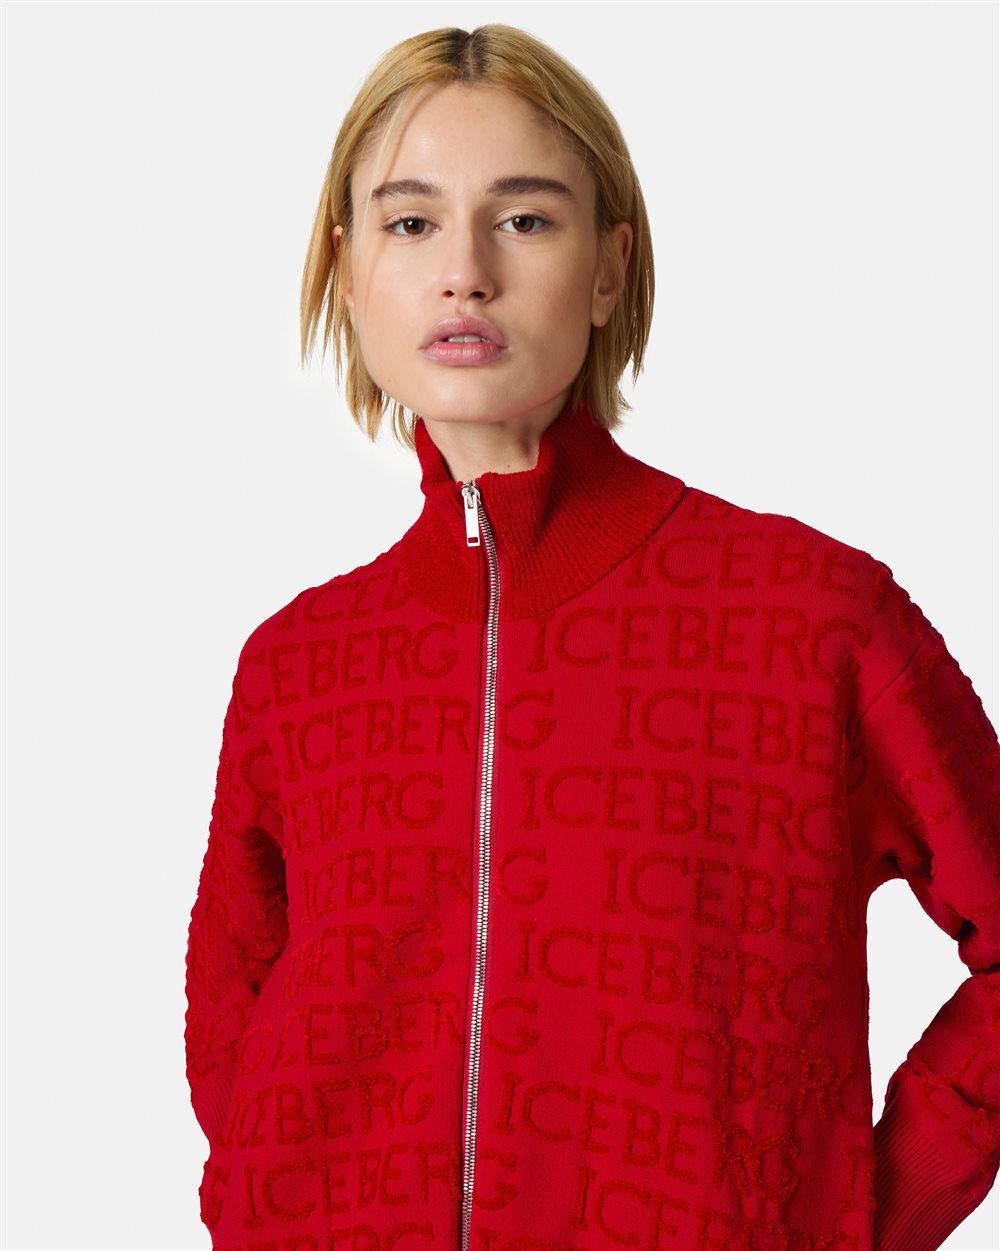 High neck cardigan with zip and logo - Iceberg - Official Website